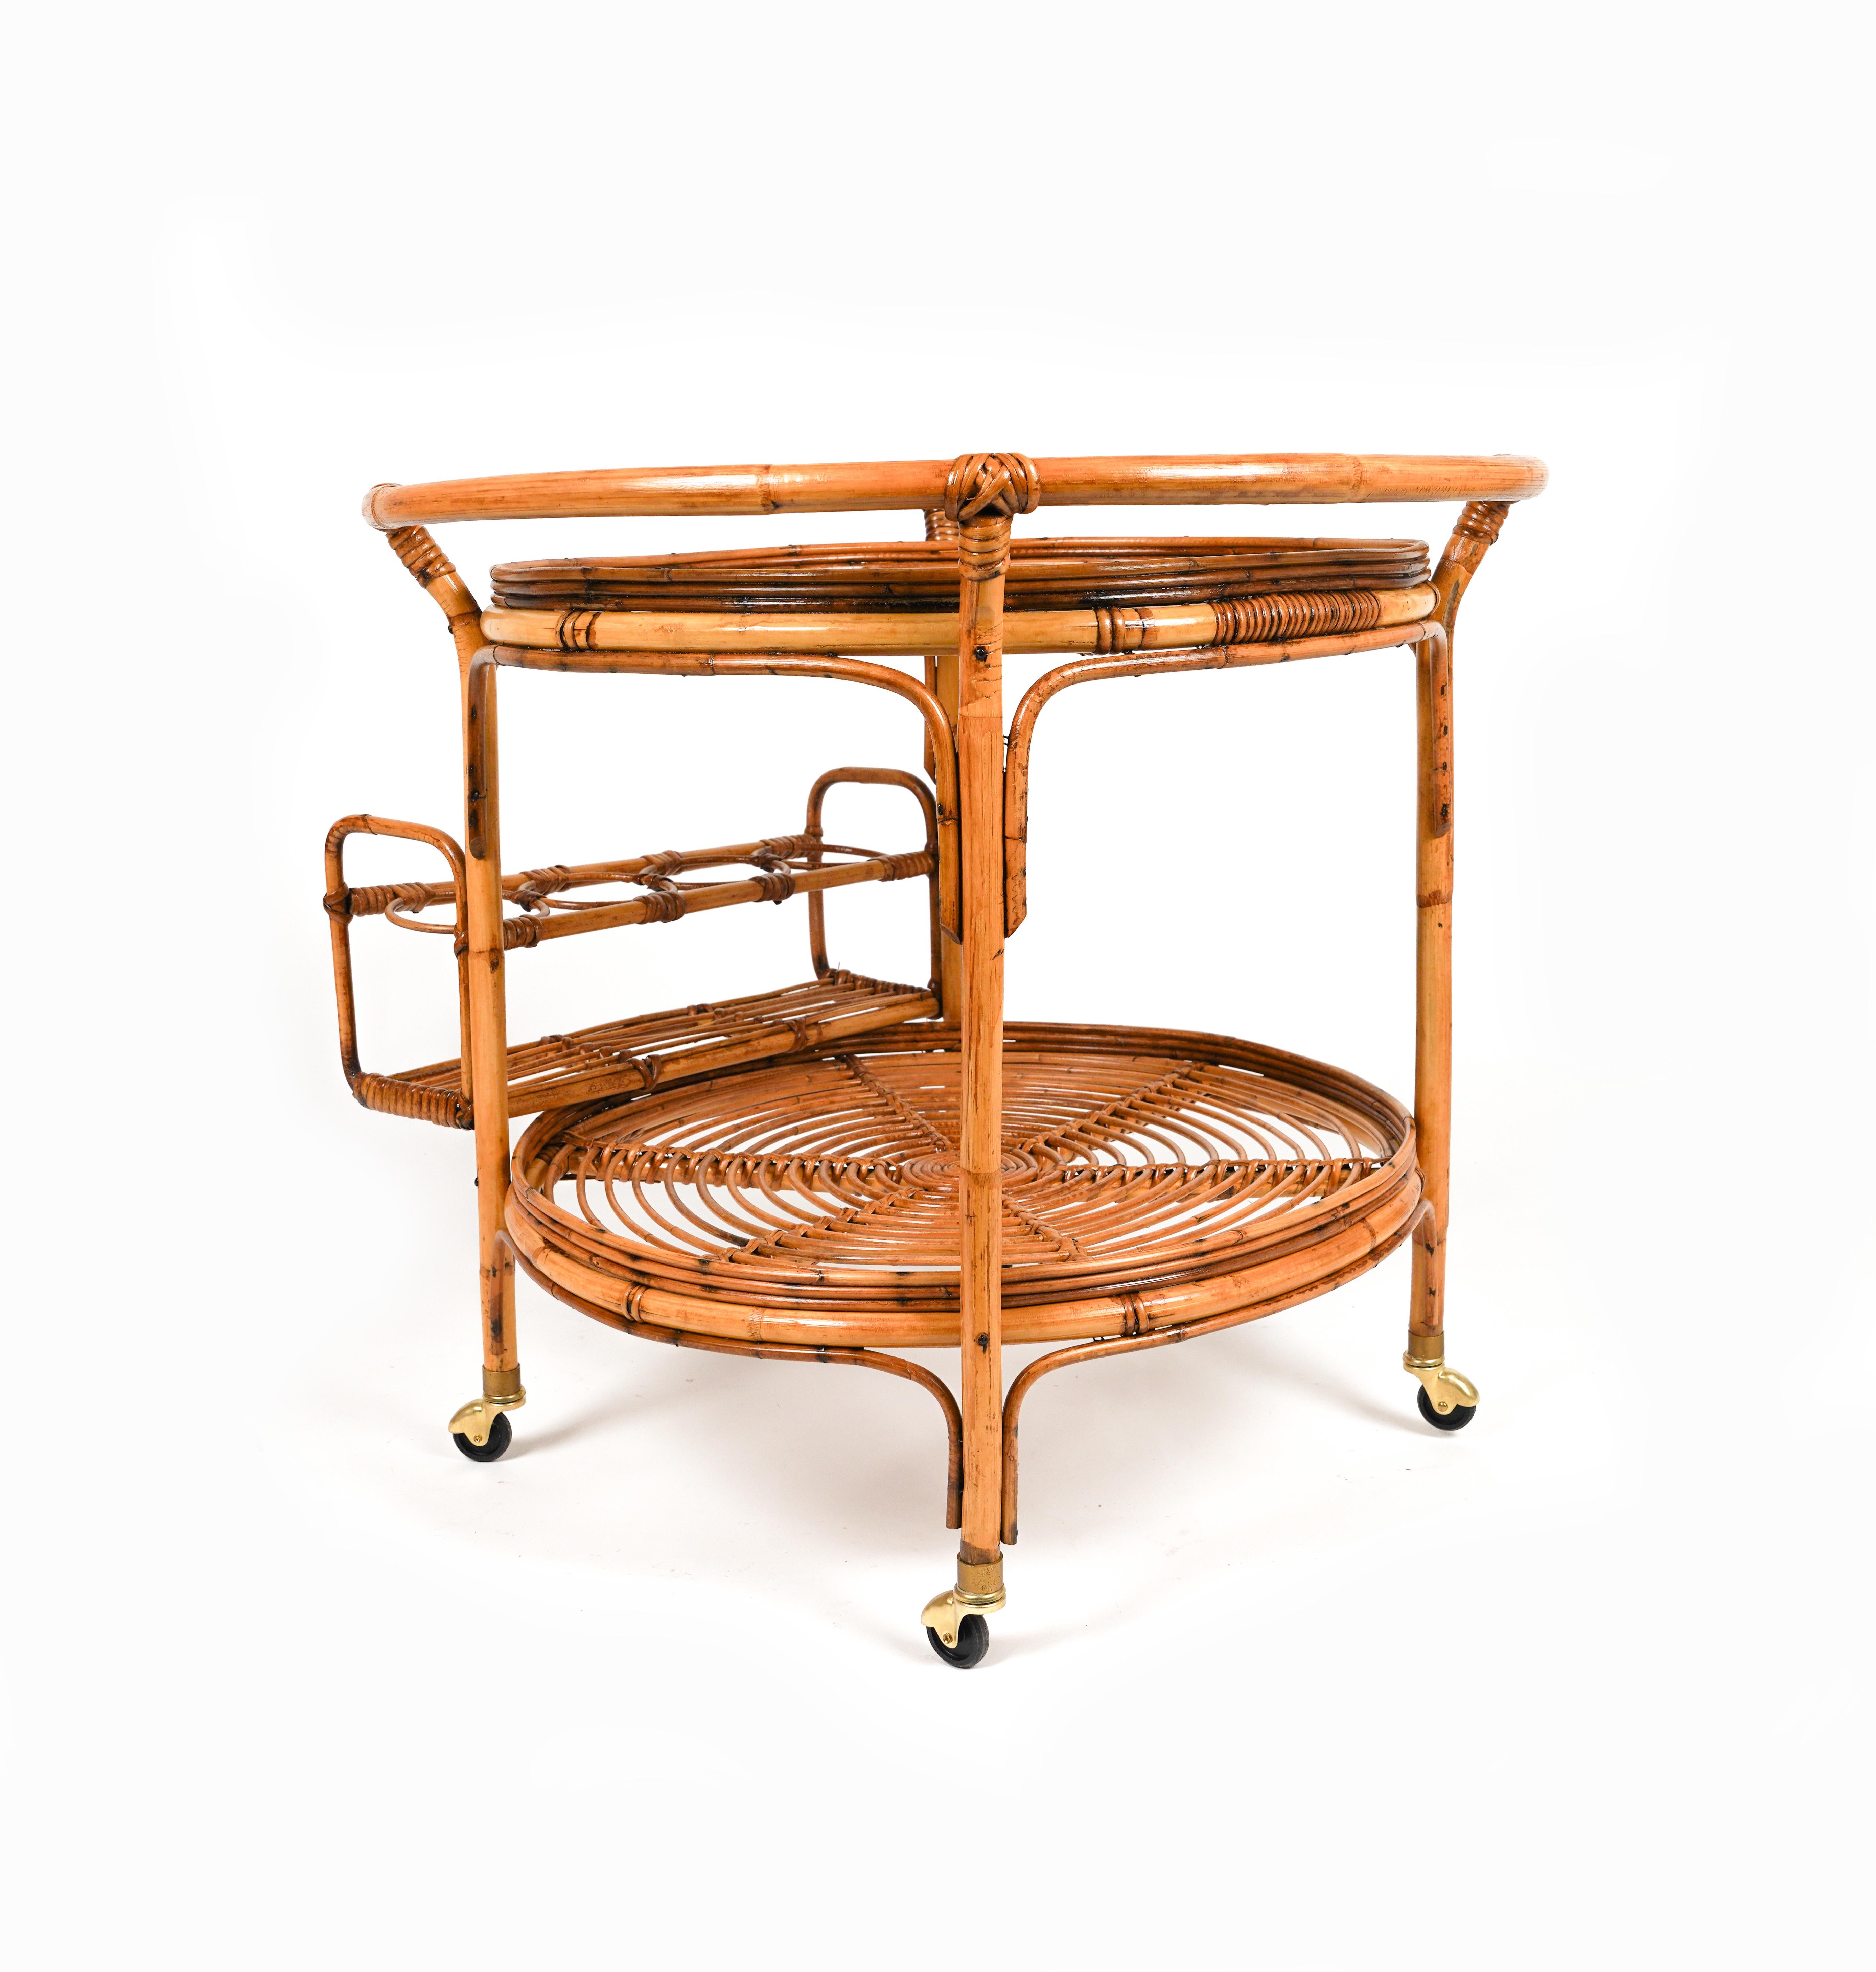 Midcentury Rattan and Bamboo Round Serving Bar Cart Trolley, Italy 1960s For Sale 10